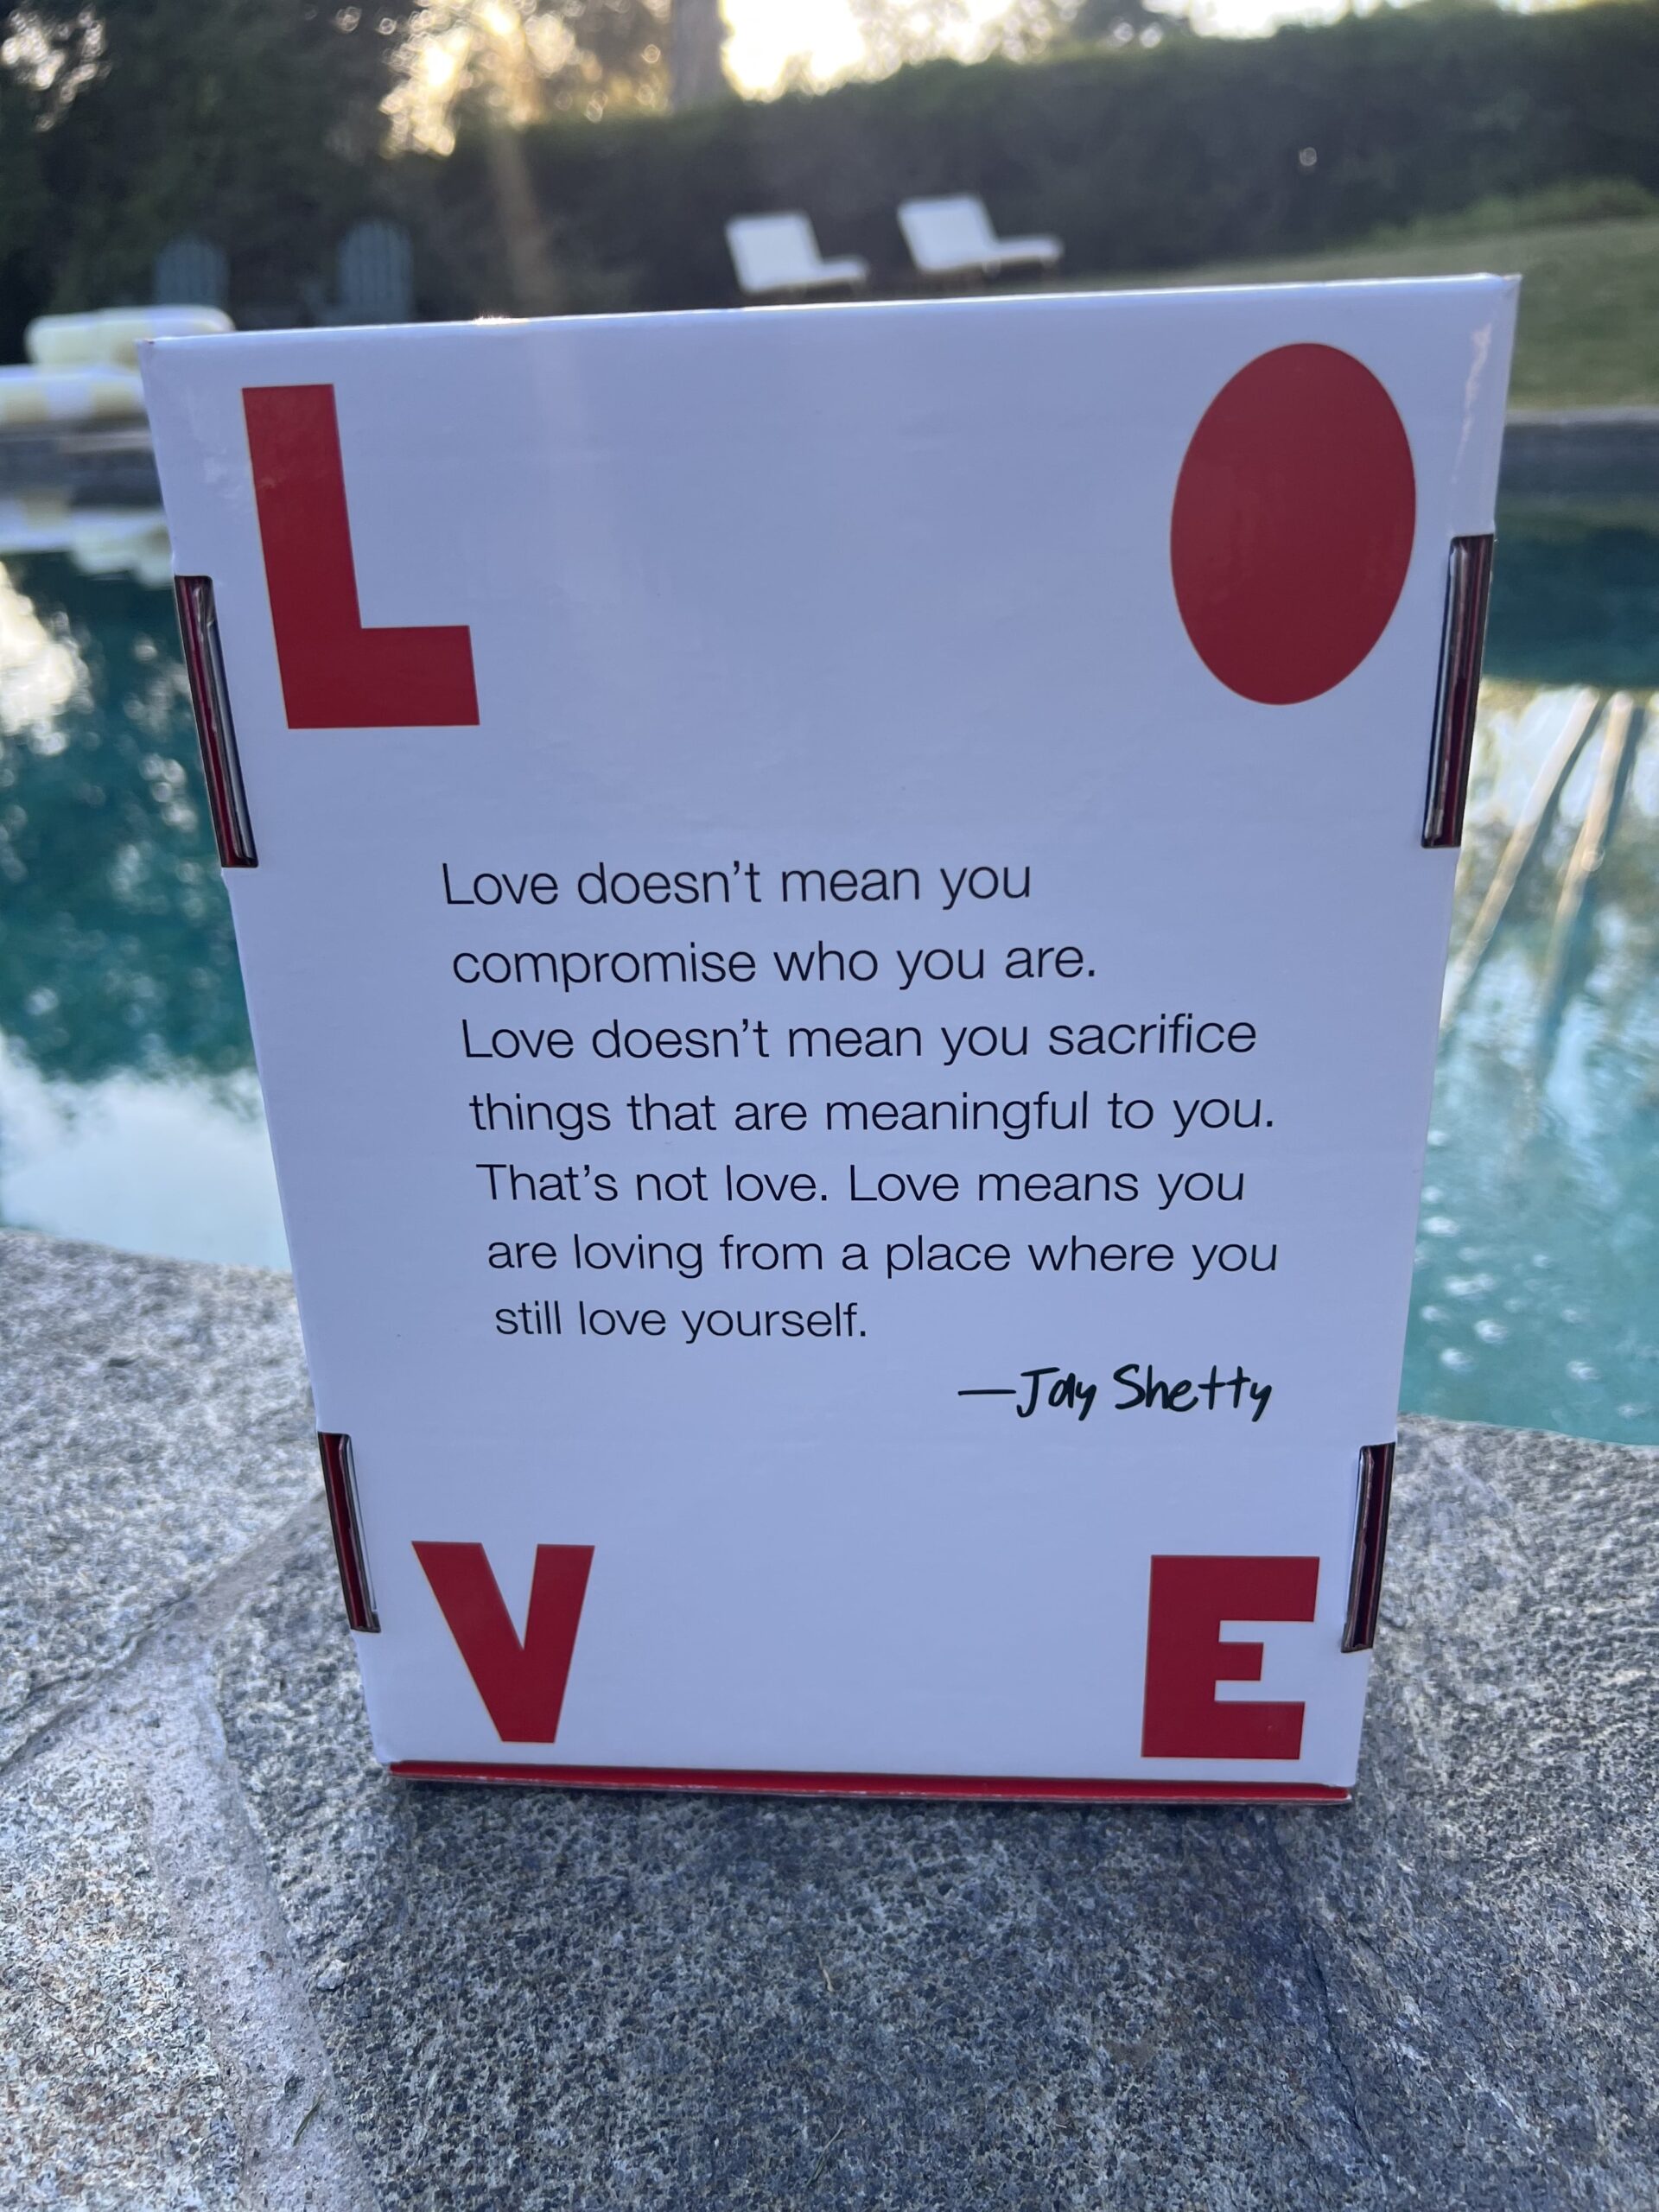 Poolside photo of Jay Shetty's 8 Rules of Love box